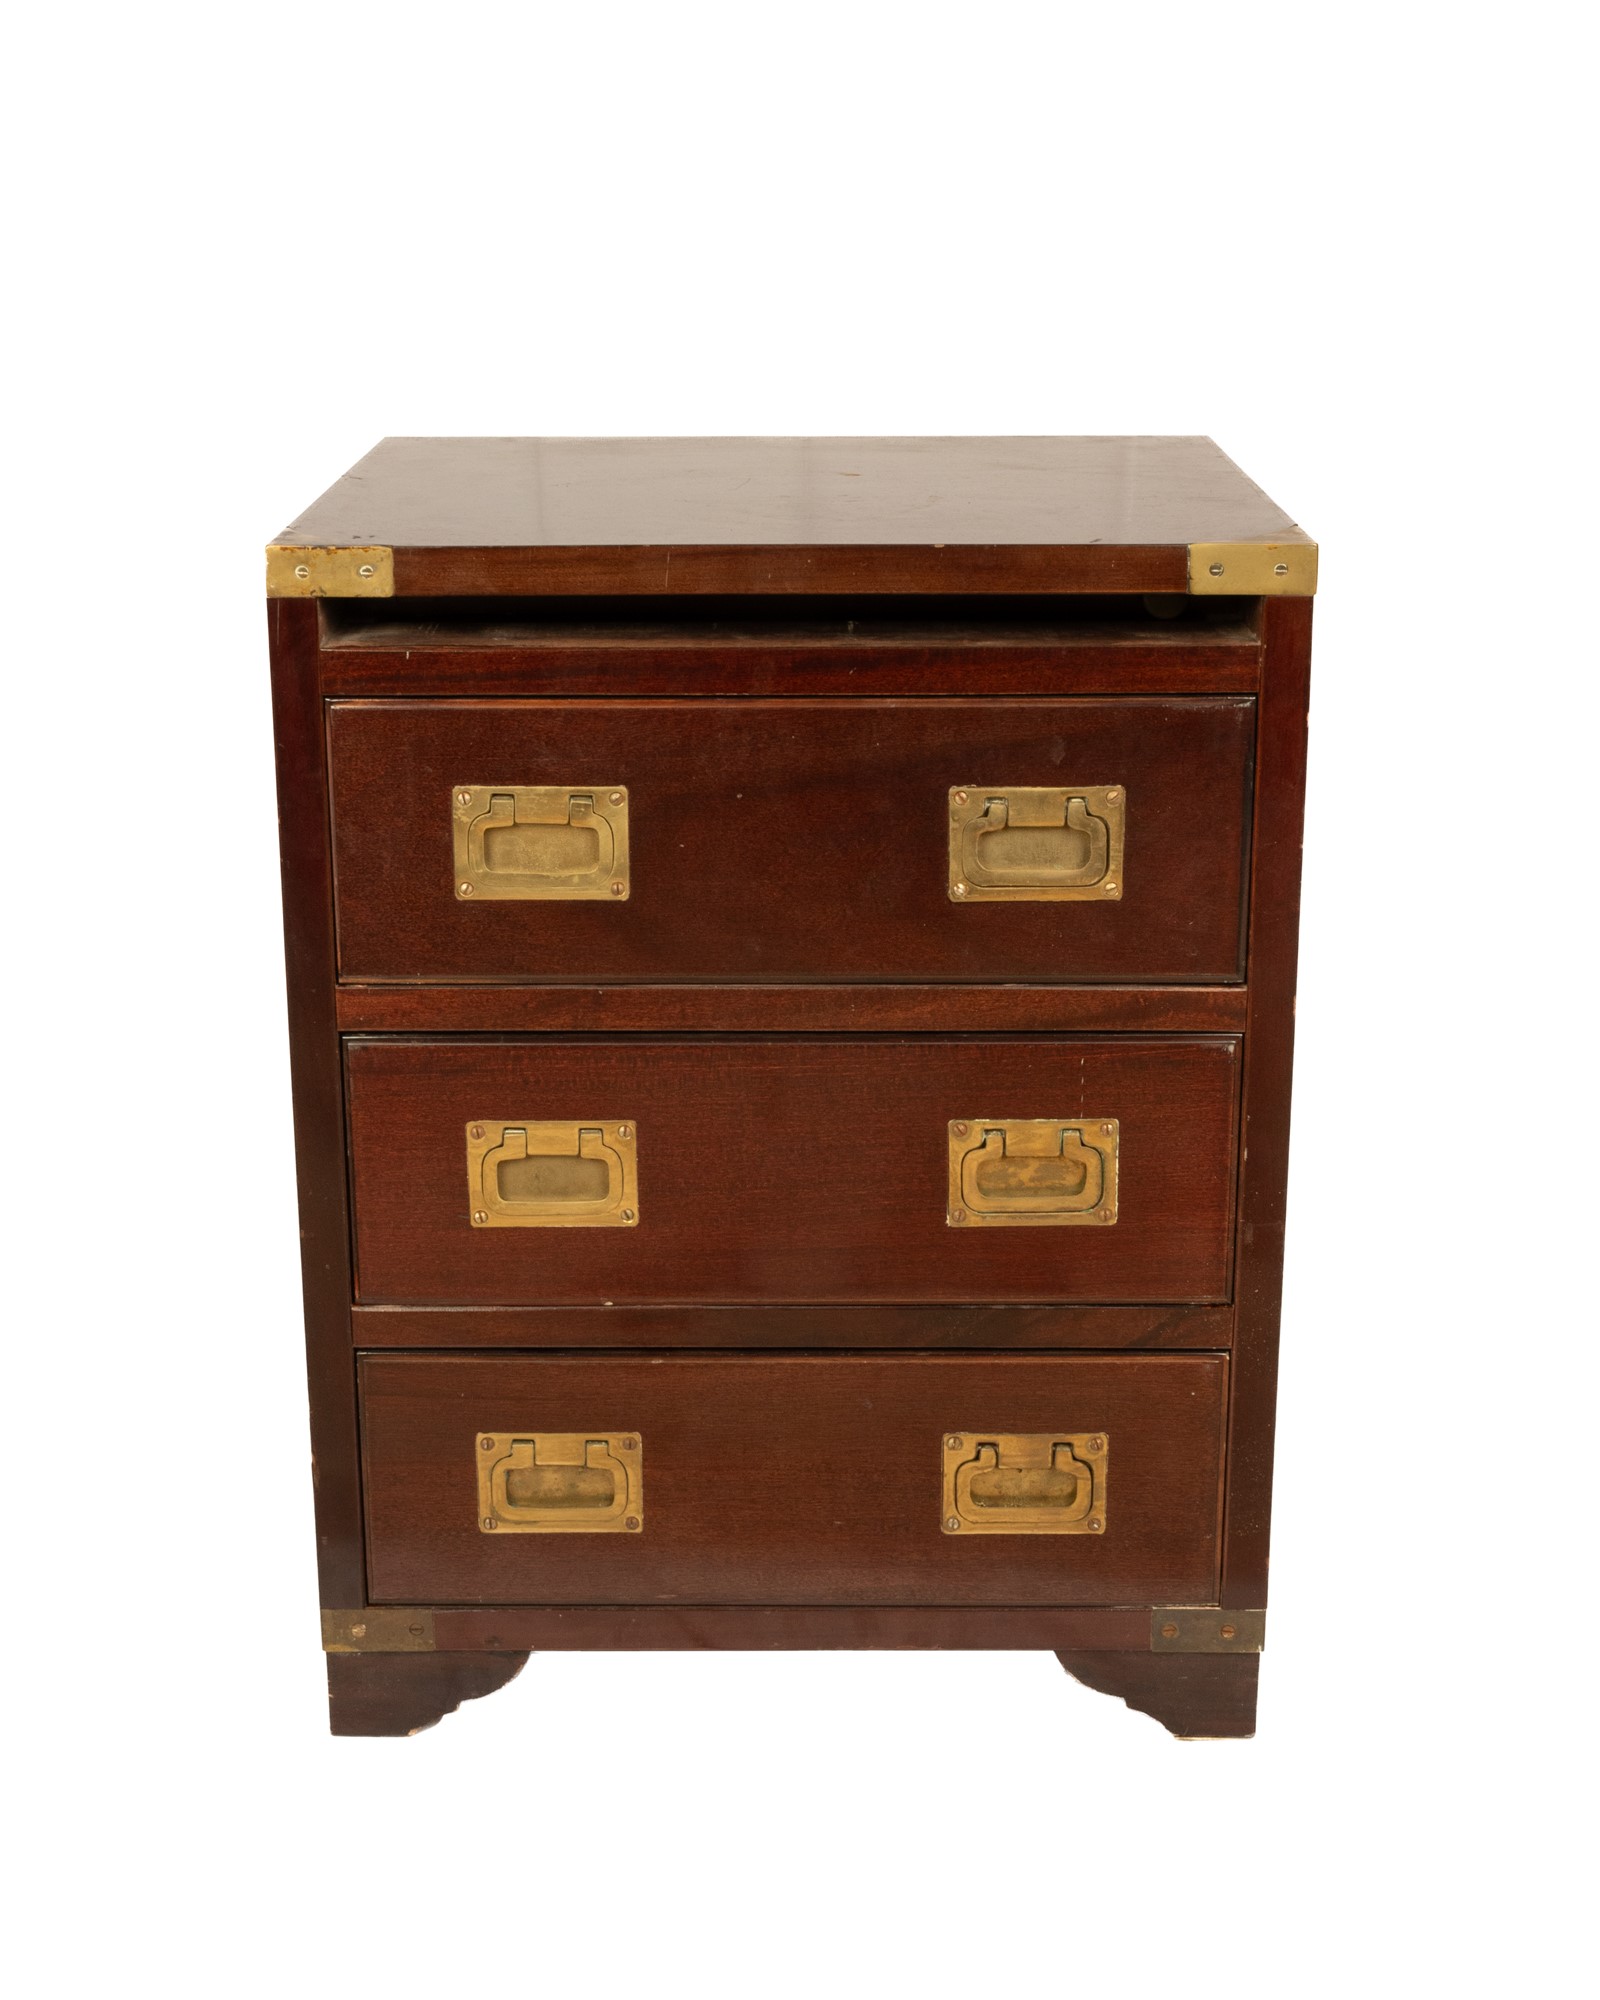 Antica Marina wooden bedside table with brass inserts - Image 14 of 23